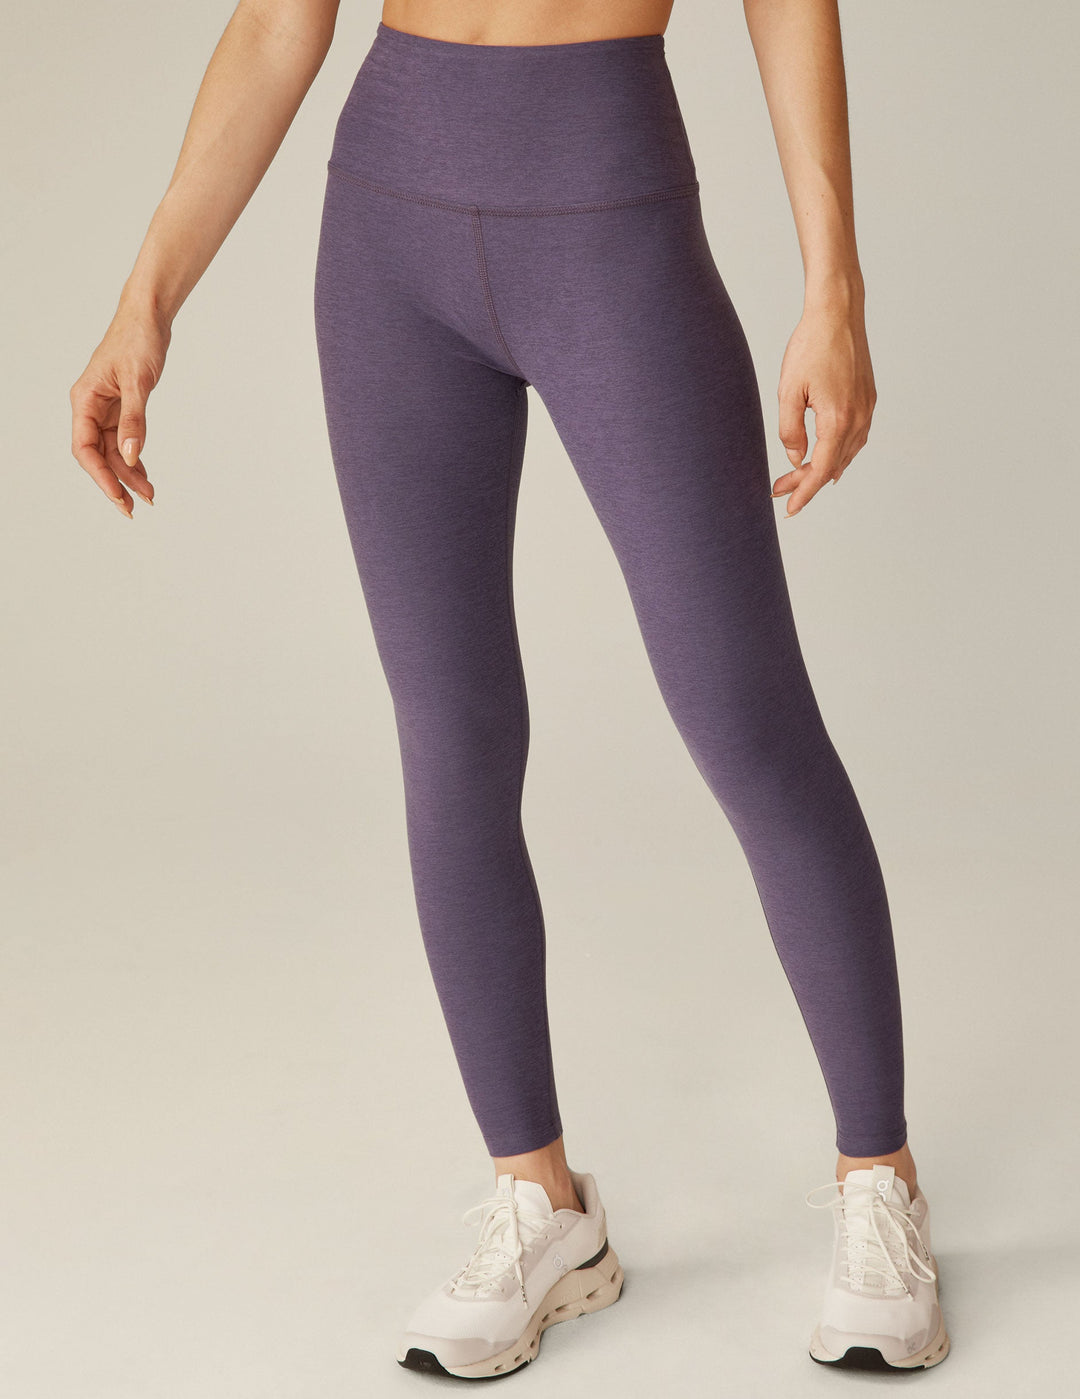 Beyond Yoga Power Beyond Strive High Waisted Midi Legging in Pink Energy, Fuchsia. Size L (also in M, S, XS).